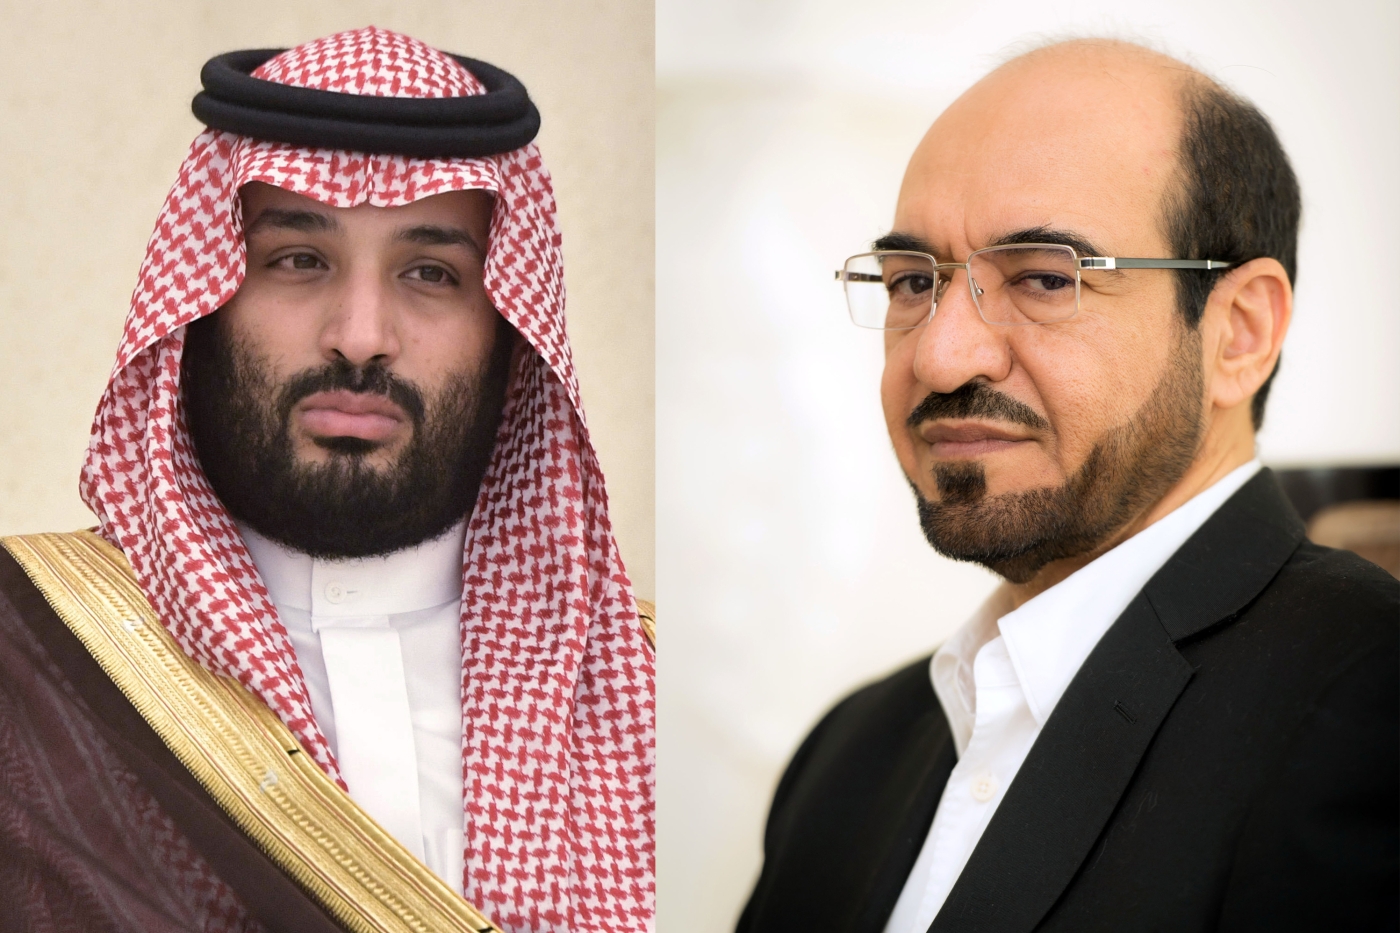 The new filing is the latest action taken in a legal battle between Jabri and bin Salman.